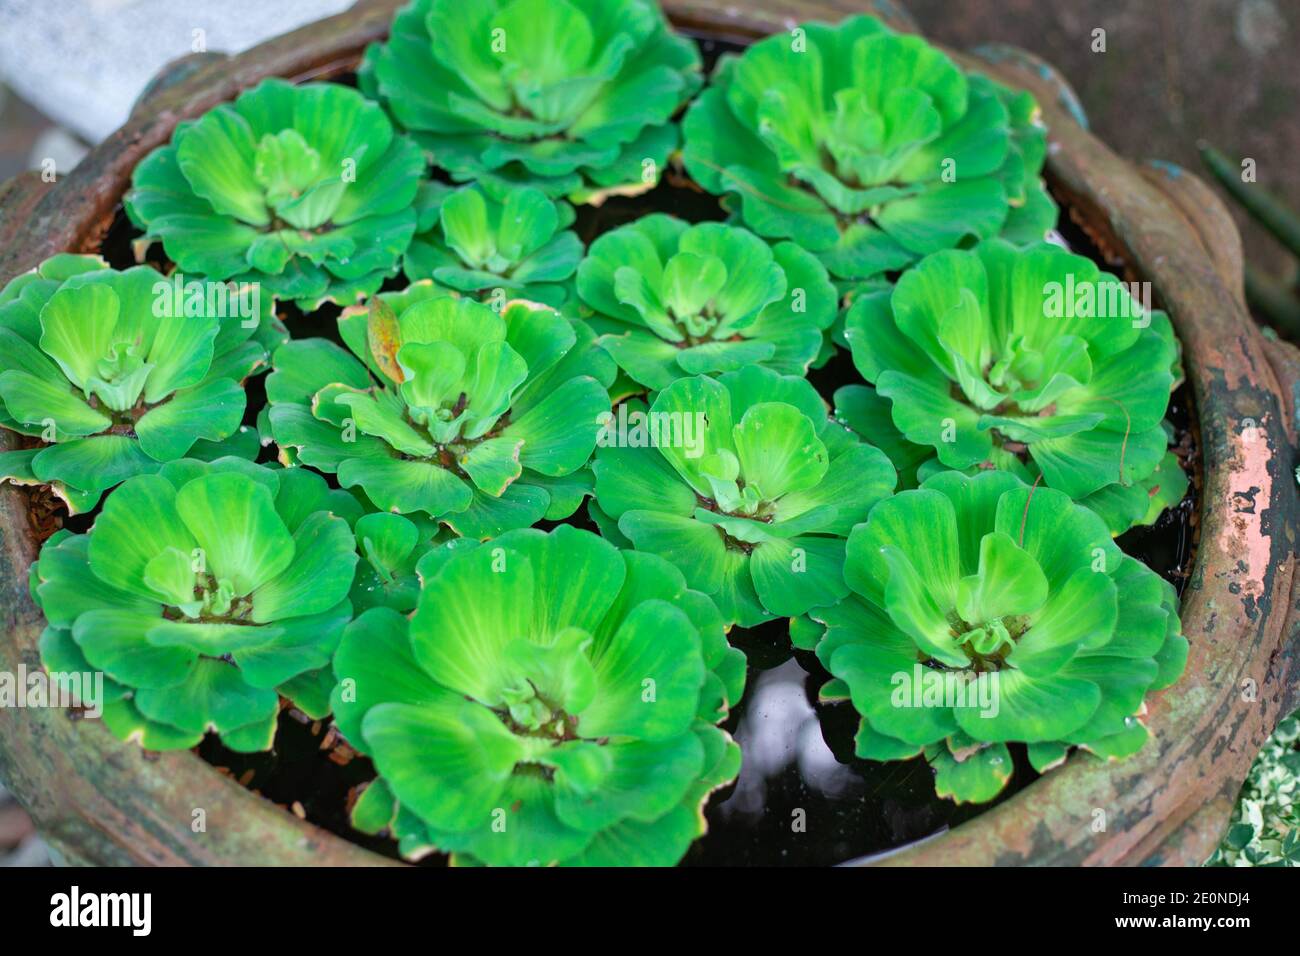 Green water lettuce in water in a vase. Landscaping and garden decor. A beautiful green plant. Stock Photo